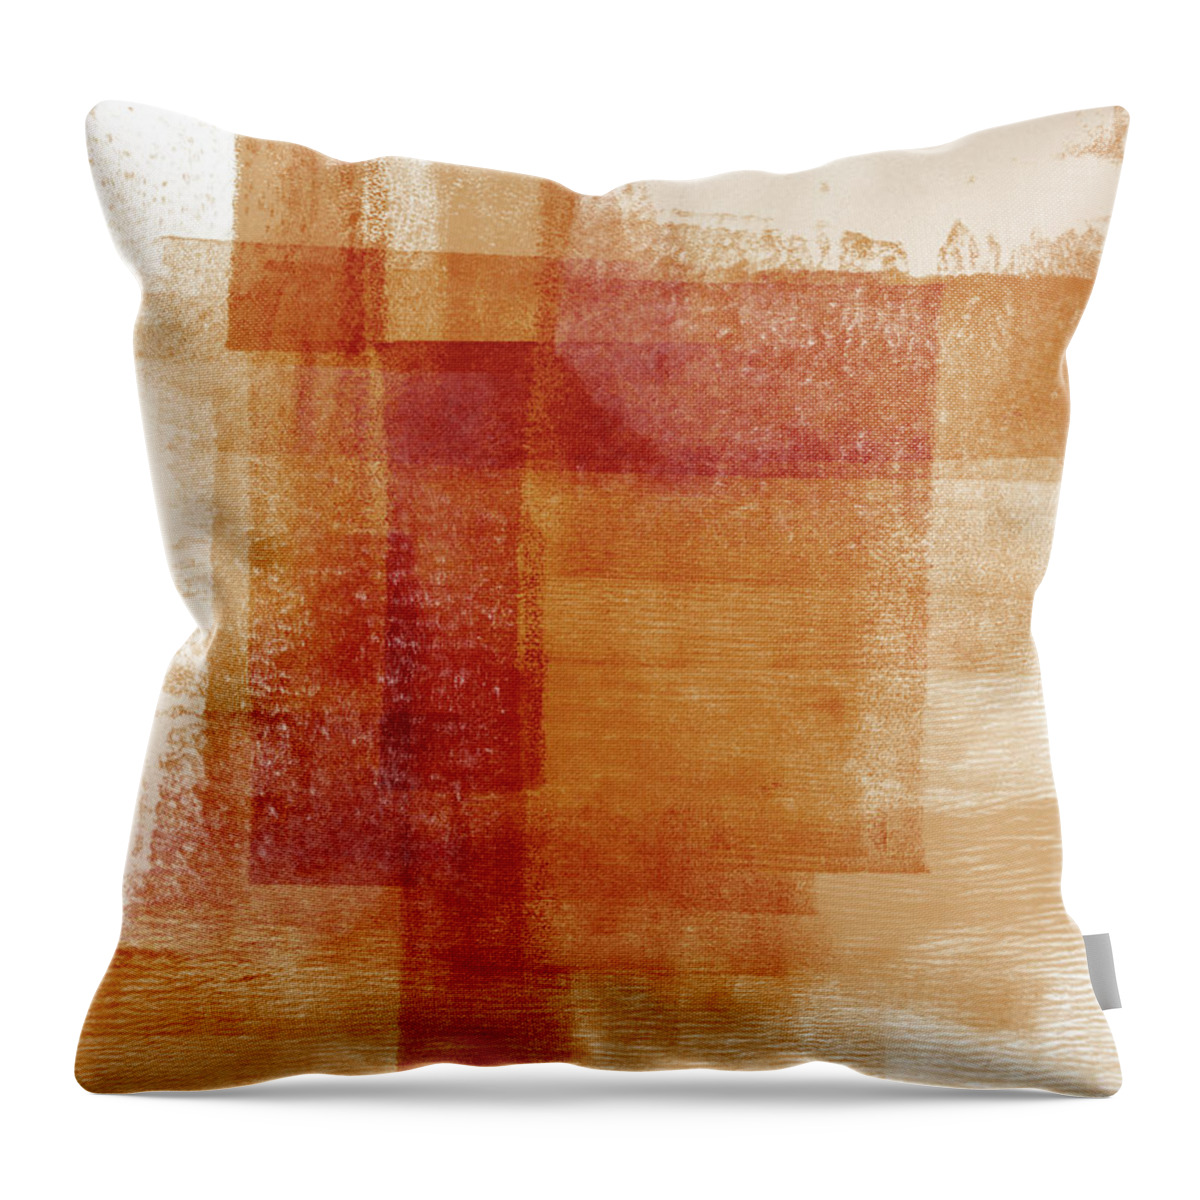 Abstract Throw Pillow featuring the painting Sienna 2- Abstract Art by Linda Woods by Linda Woods